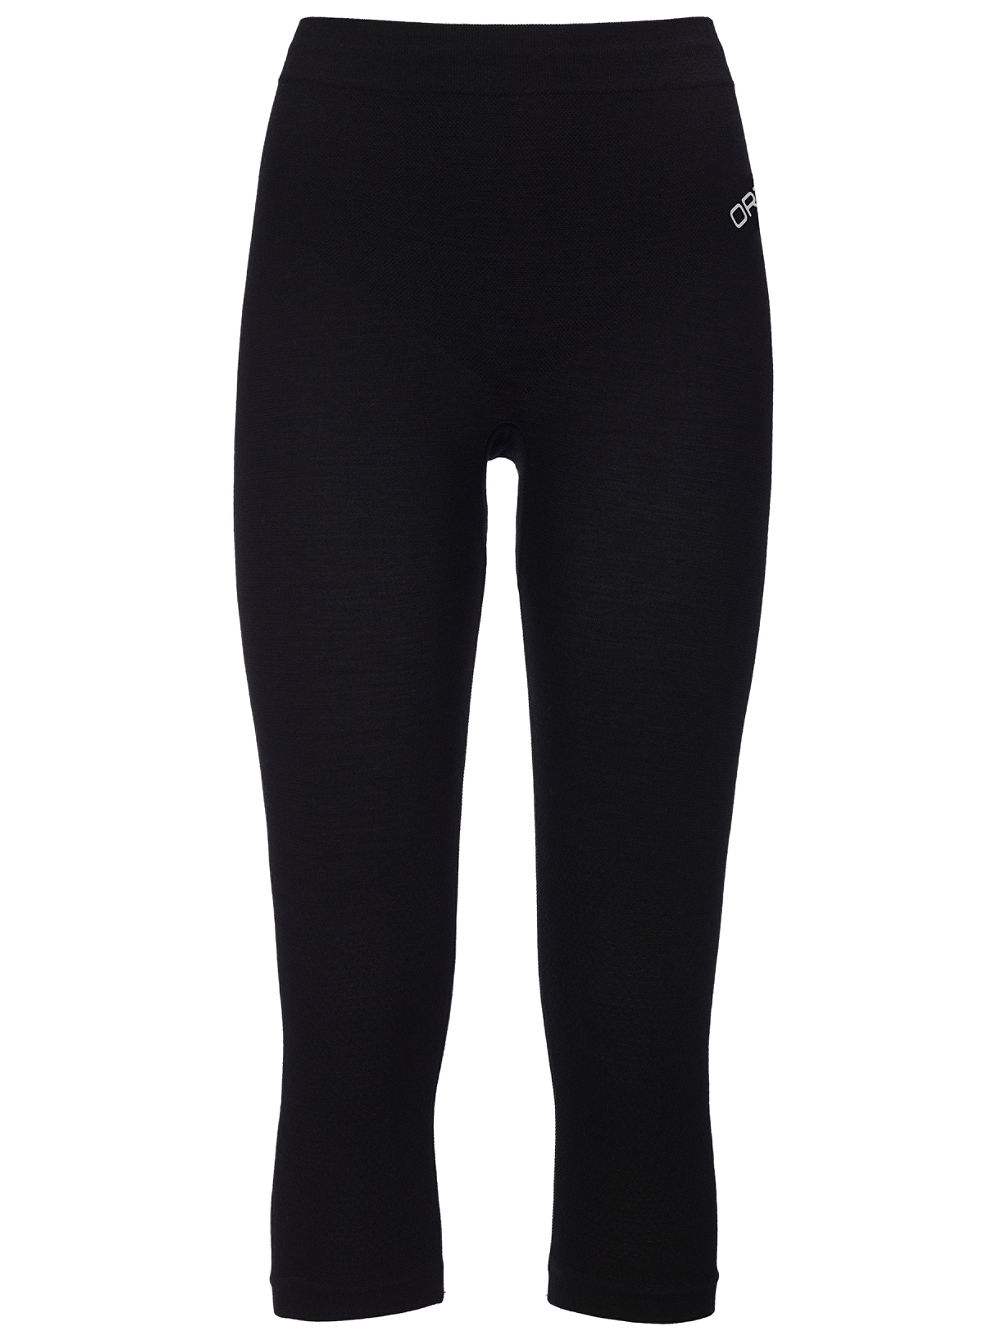 230 Competition Short Base Layer Bottoms